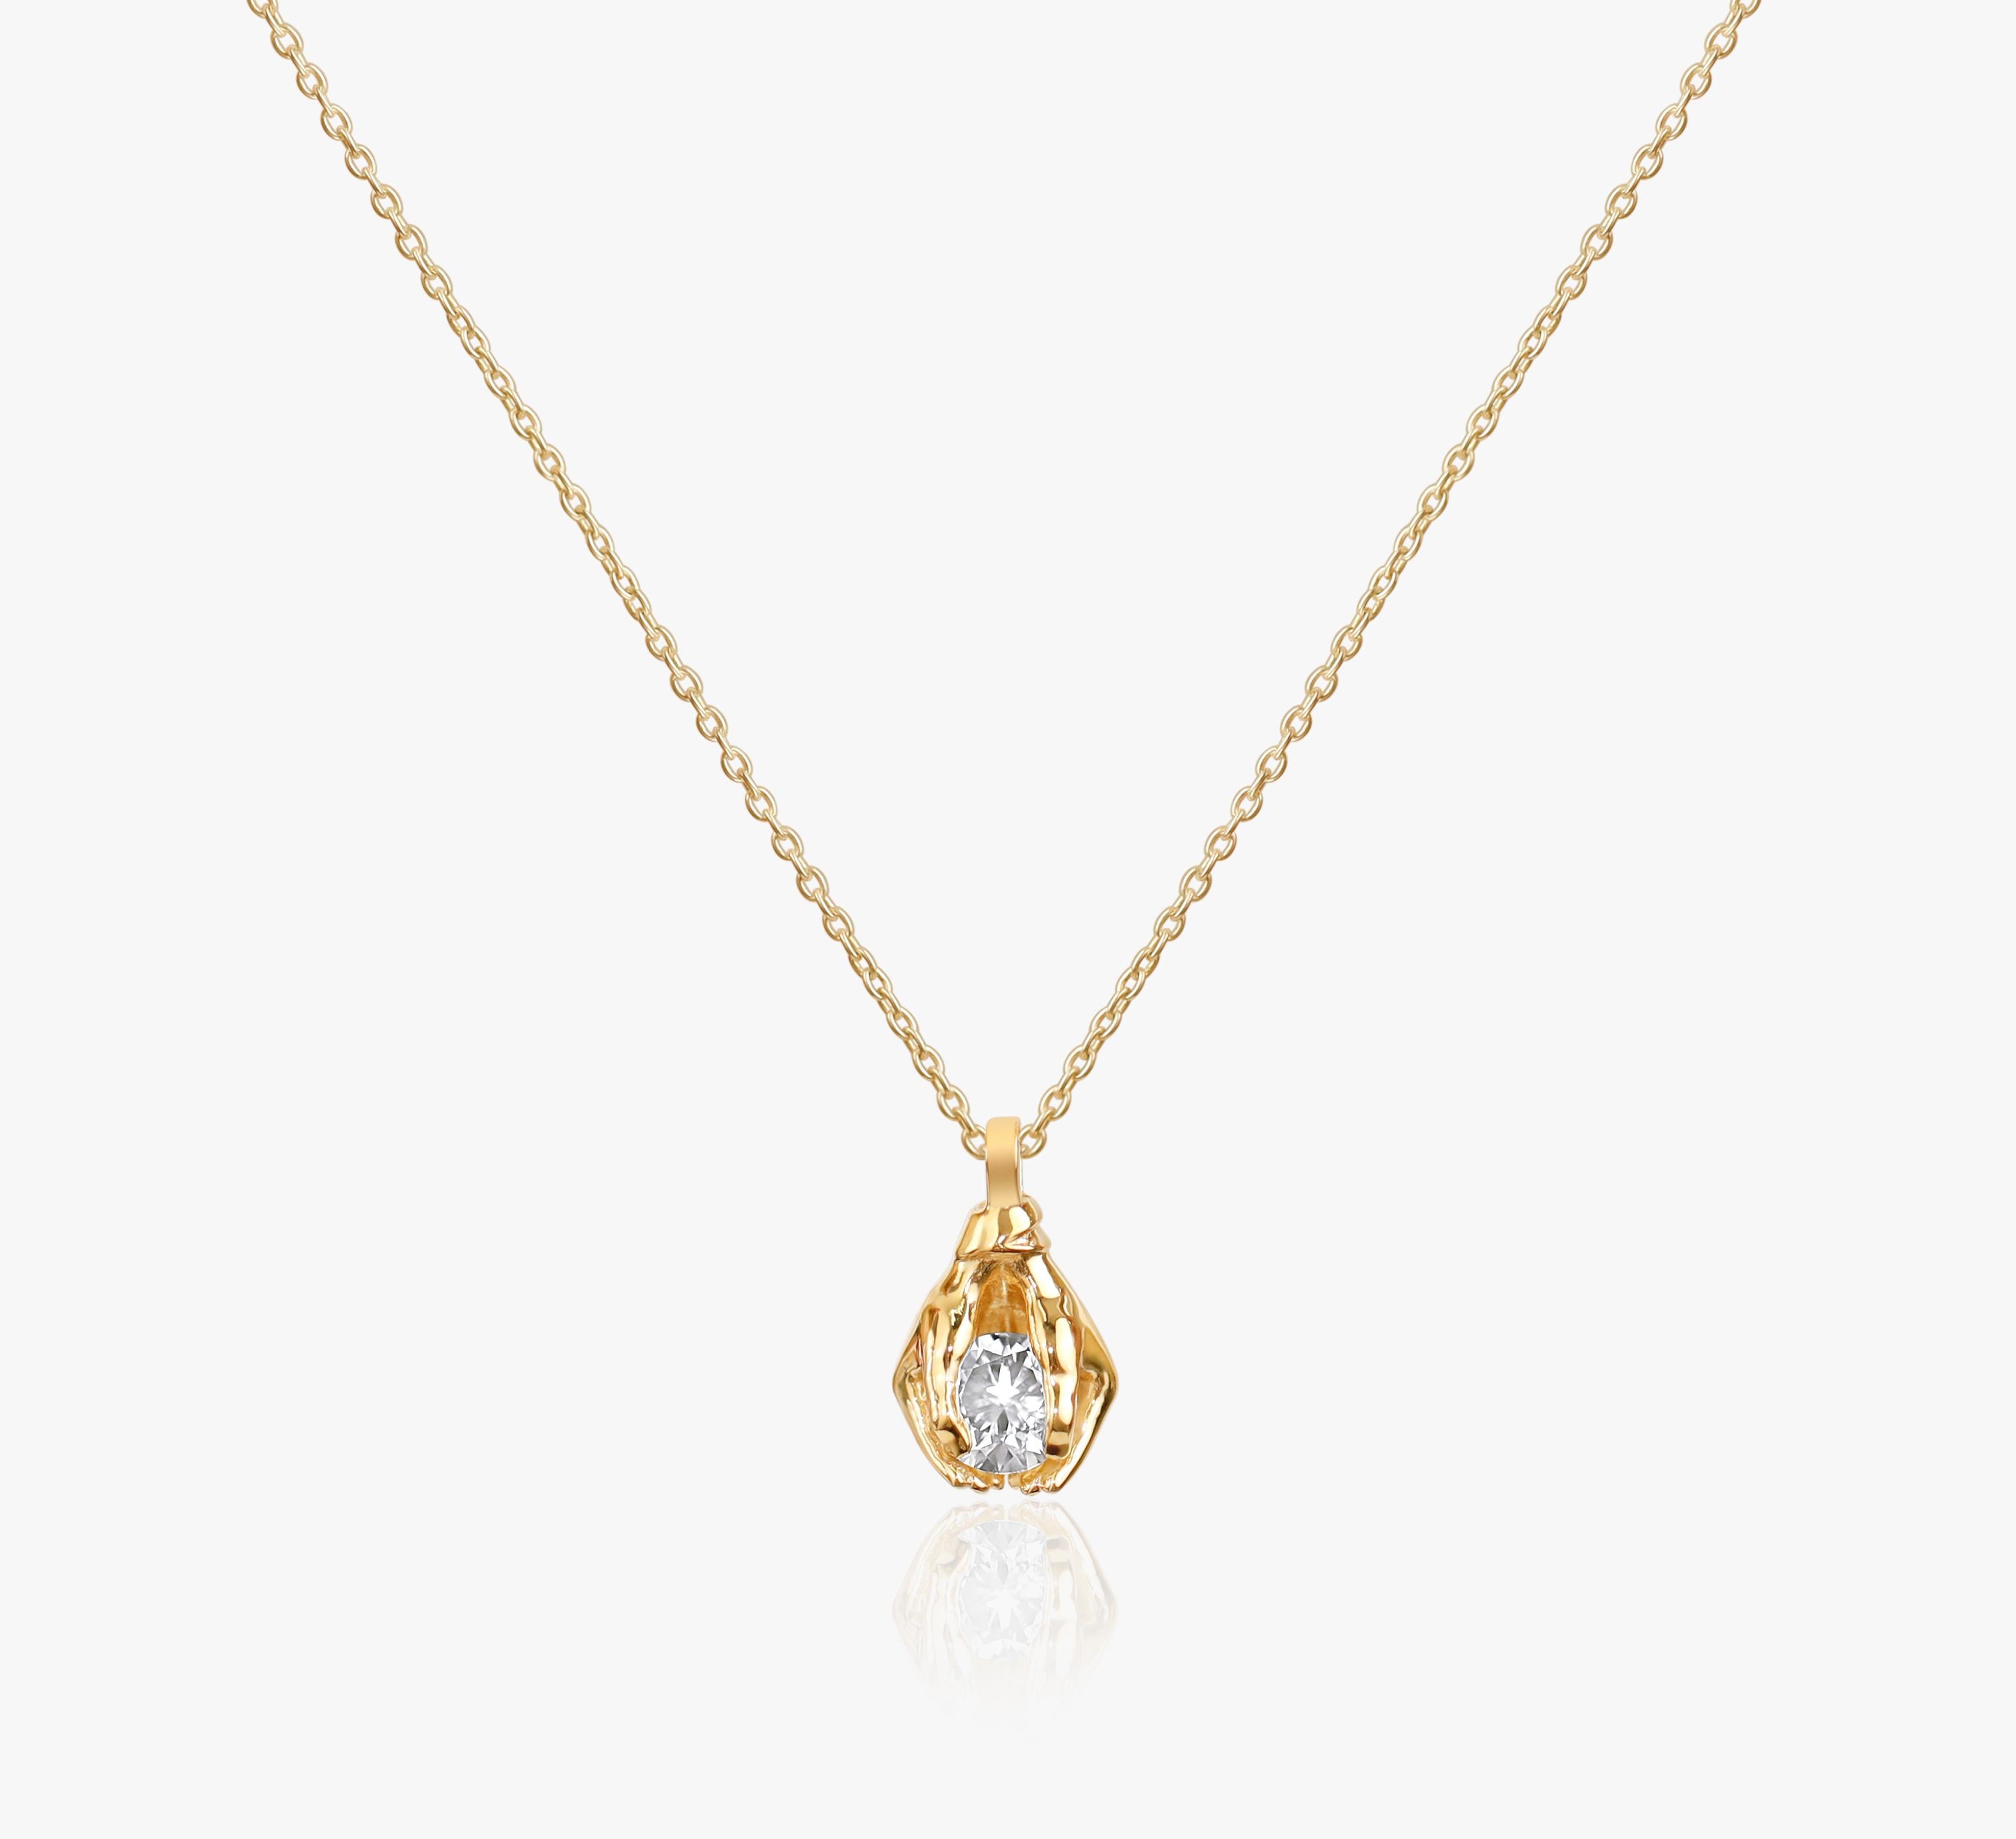 GIA Report Certified 1.75 Carat F VS Round Cut Diamond Pendant Necklace

Available in 18k Yellow gold.

Same design can be made also with other custom gemstones per request.

Product details:

- Solid gold 18k yellow 

- Main stone - approx. 1.75